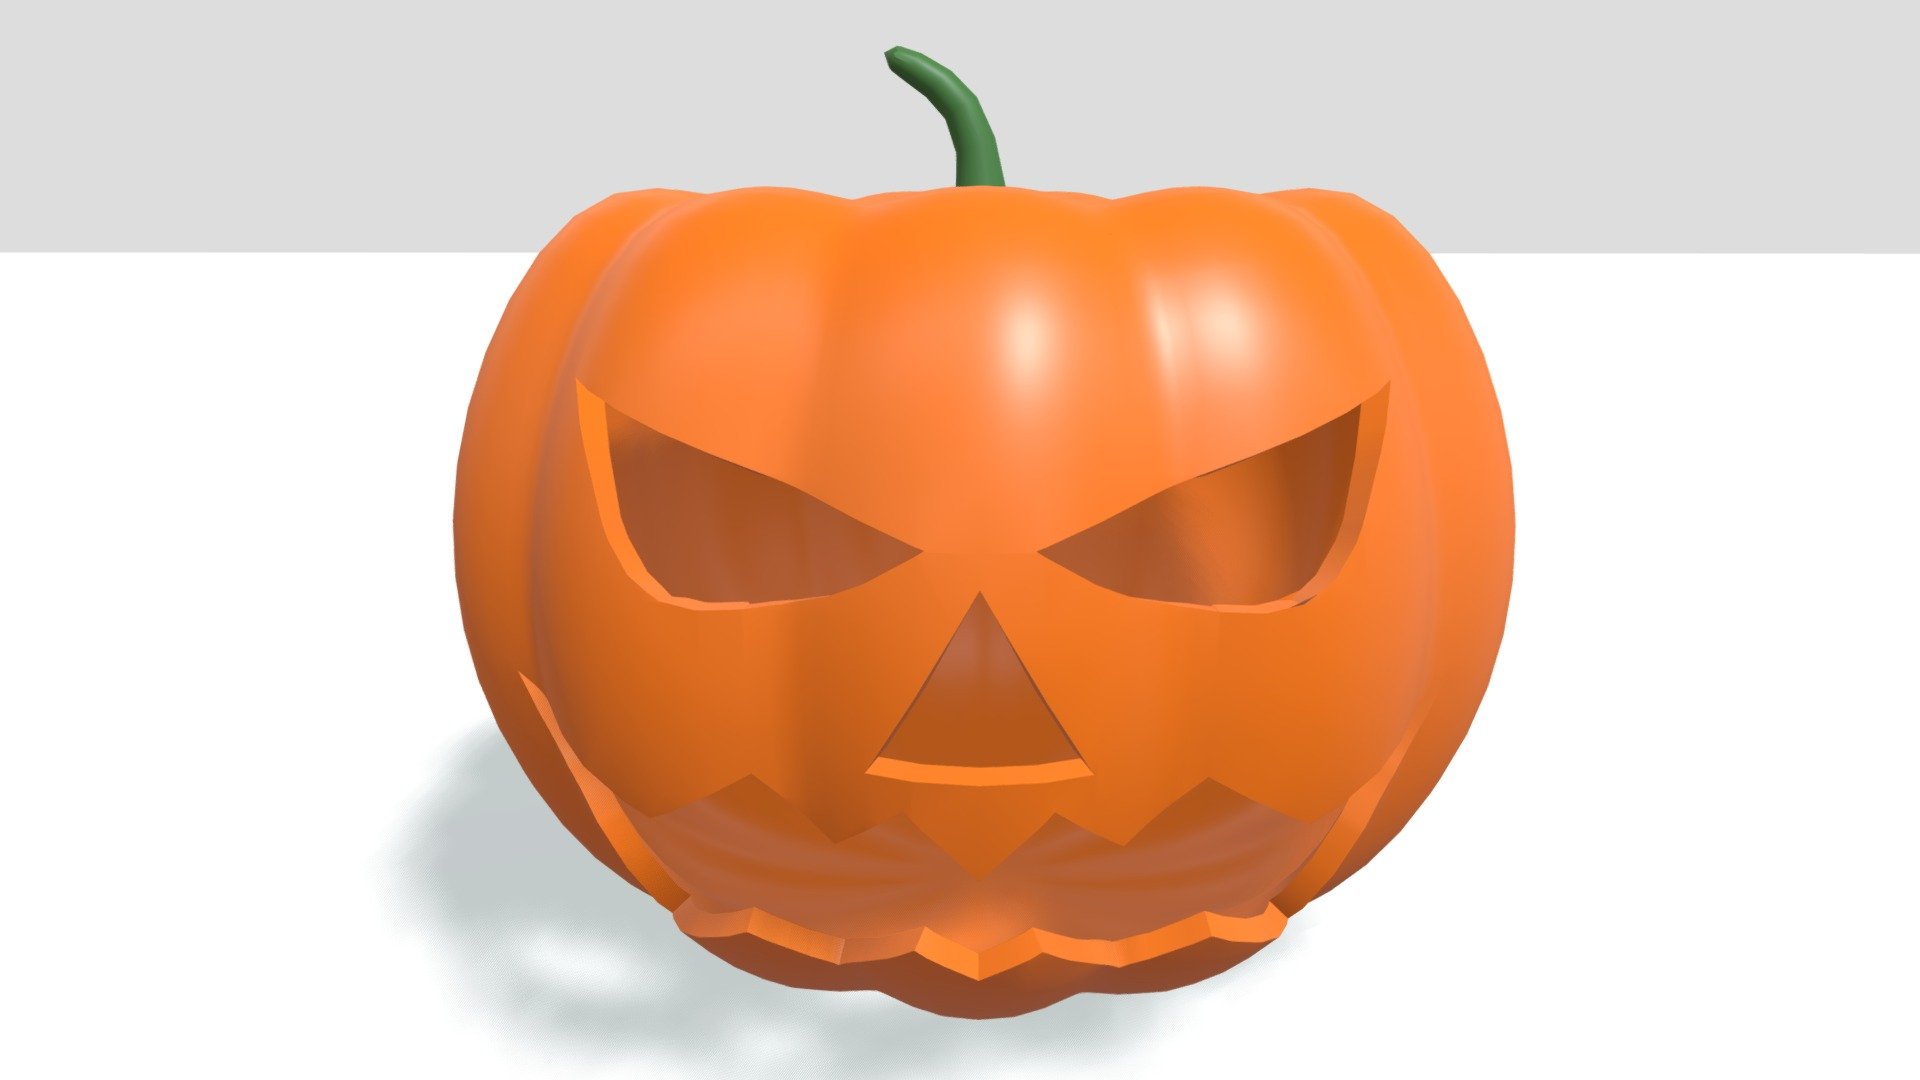 -Cartoon Halloween Pumpkin.

-This product contains 1 object.

-Vert: 9,106 poly: 9,060.

-This product was created in Blender 2.8.

-Formats: blend, fbx, obj, c4d, dae, abc, stl, u4d glb, unity.

-We hope you enjoy this model.

-Thank you 3d model